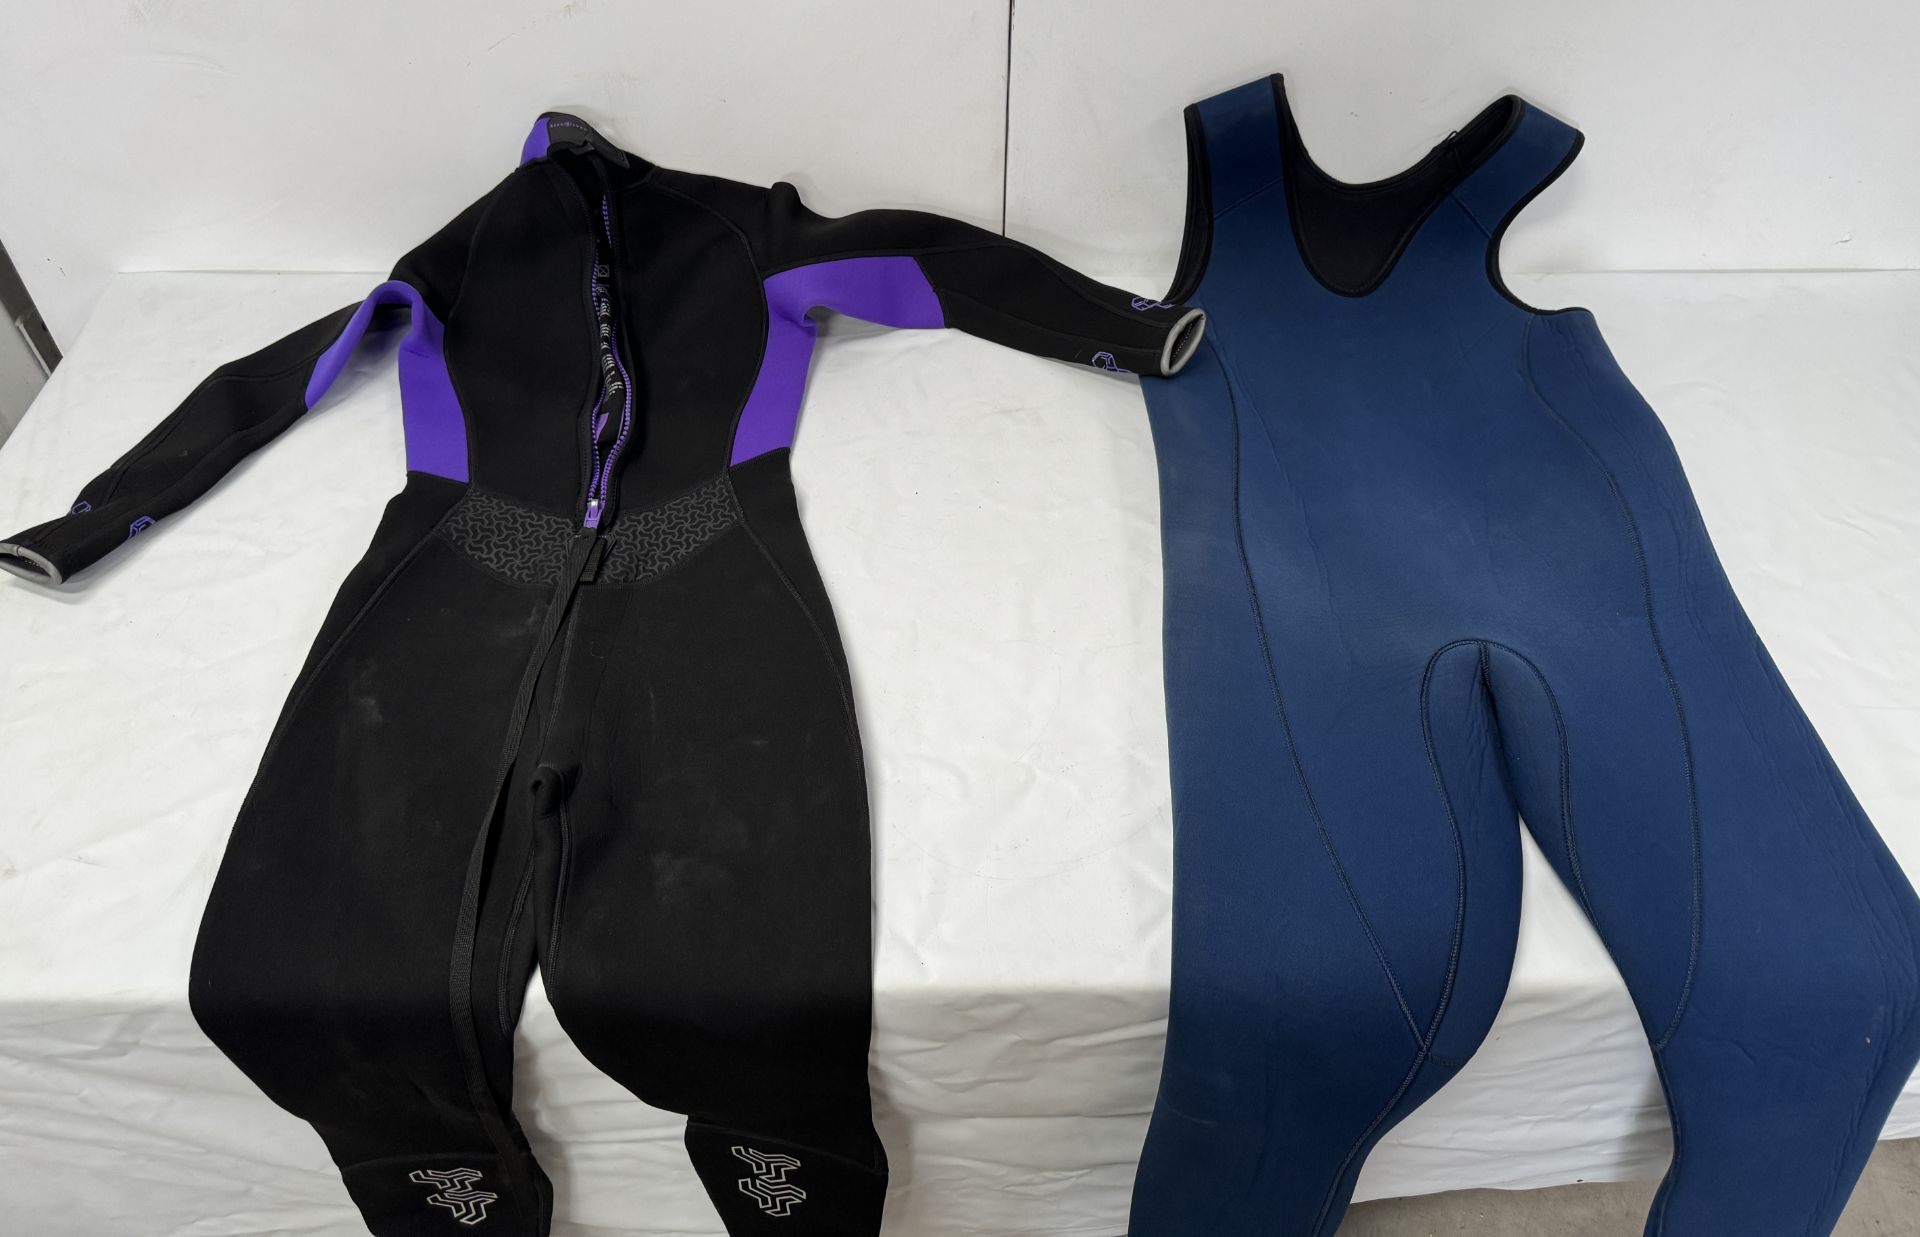 Kids Osprey Wetsuit, Aqua Lung Woman’s Wetsuit (Size M), Beuchat & Seac Wetsuits (Location: - Image 5 of 10